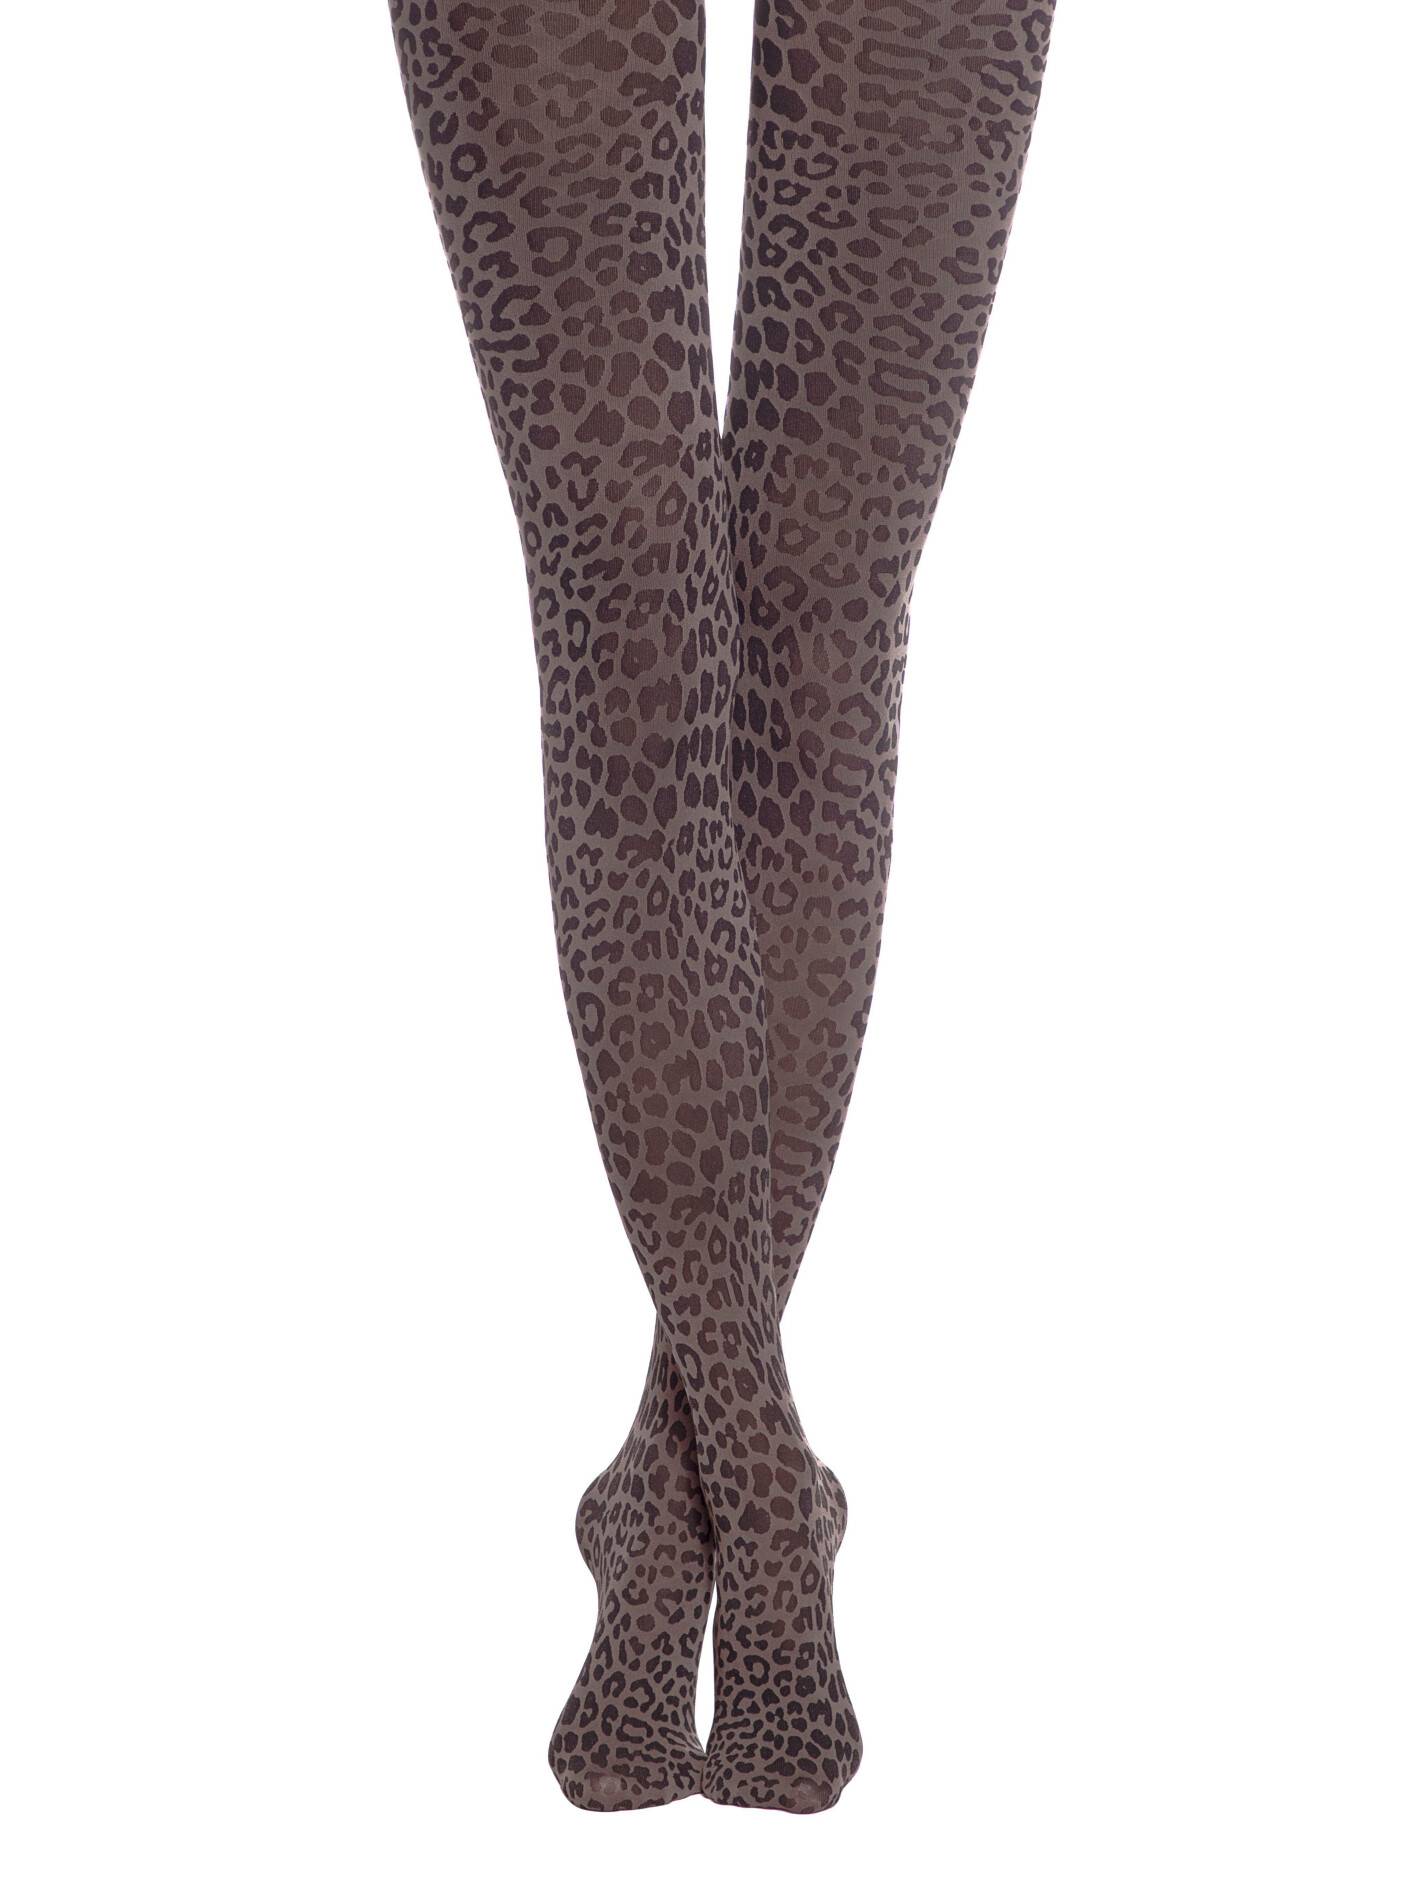 print Leopard Official Conte store - Lycra® LEO online tights